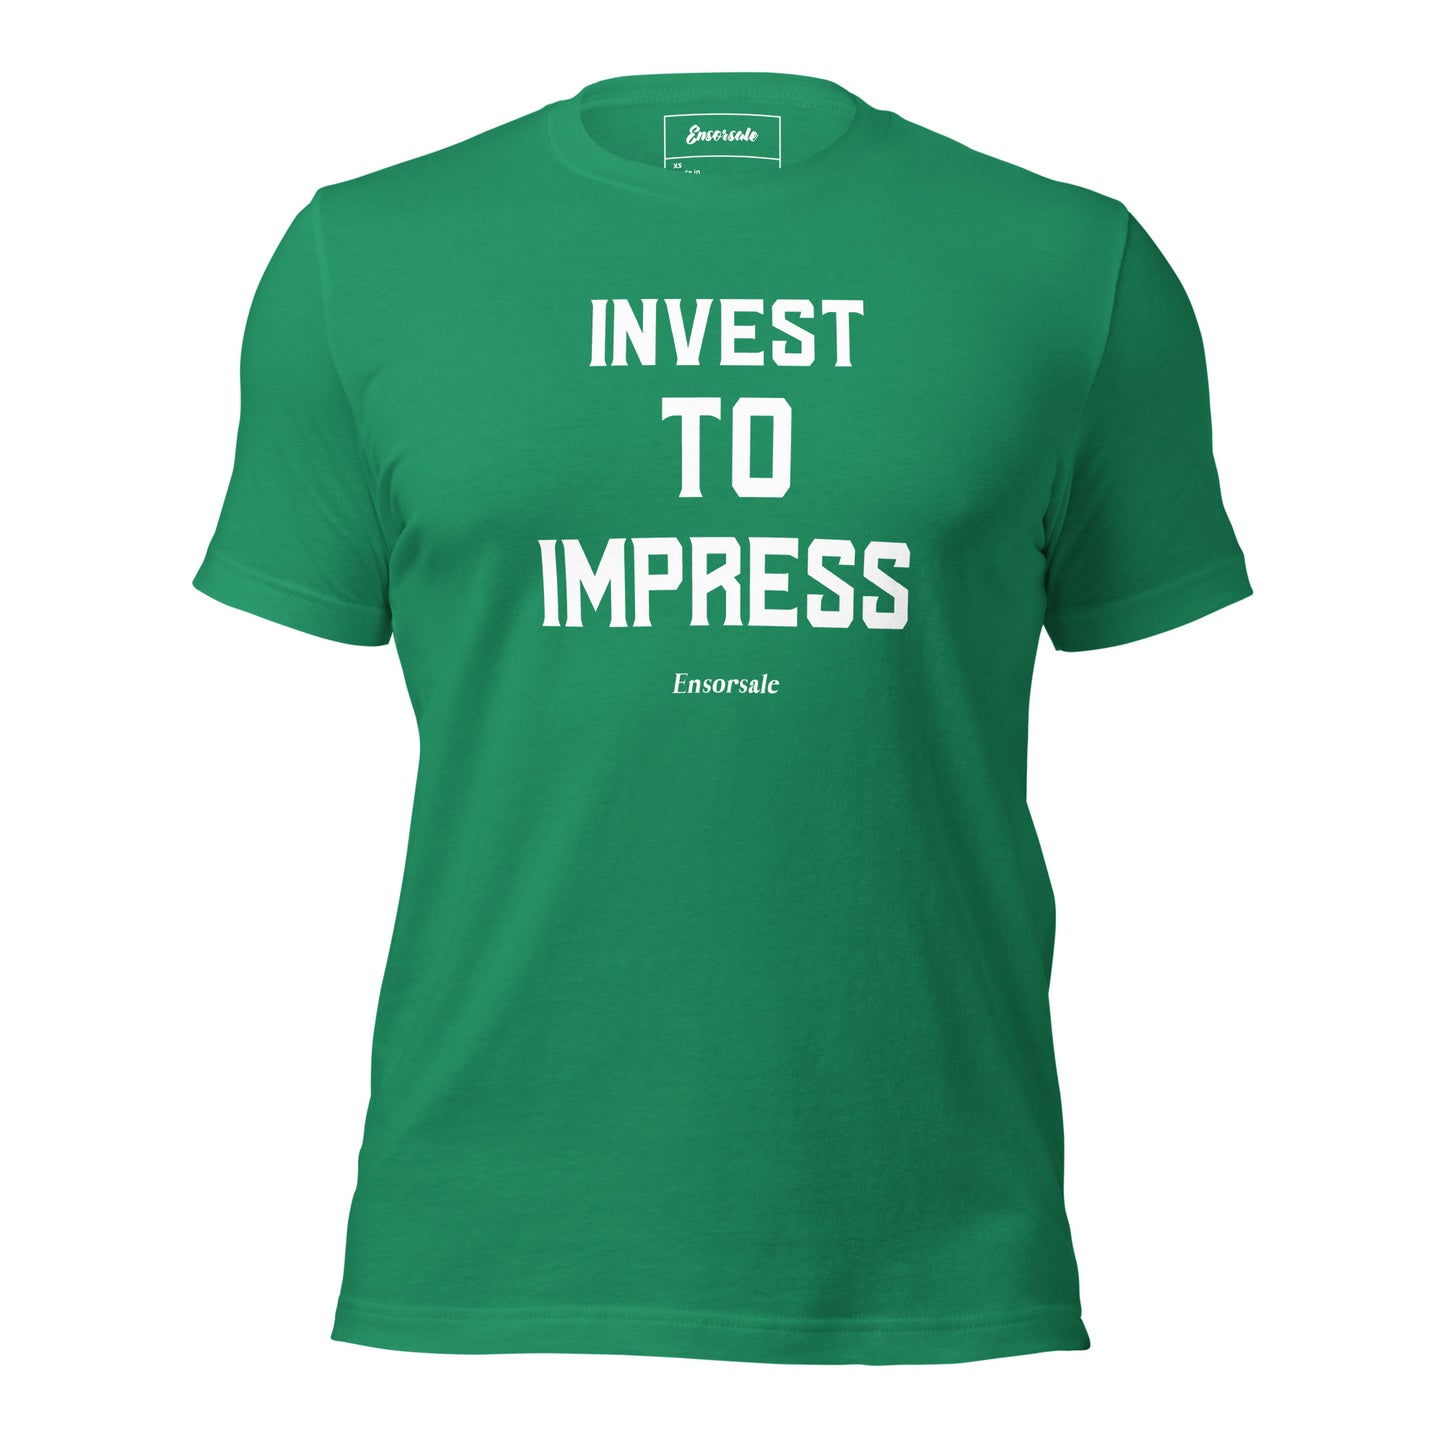 Invest To Impress t-shirt